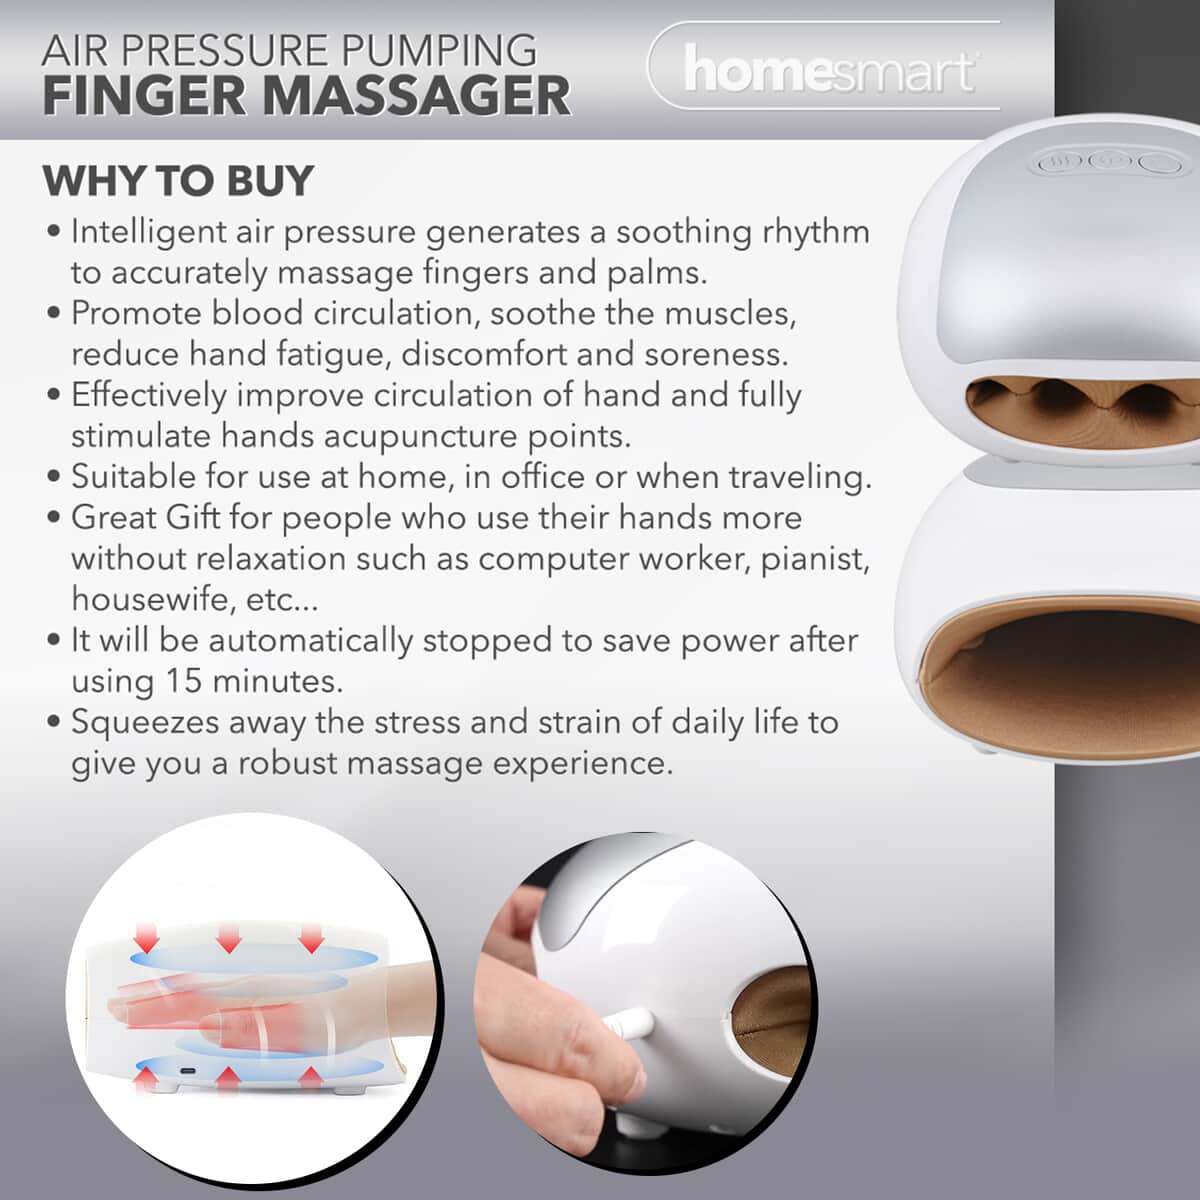 White Finger Air Pressure Pumping Hand Massager with Rechargeable Battery 2500mAh & USB Cable image number 3